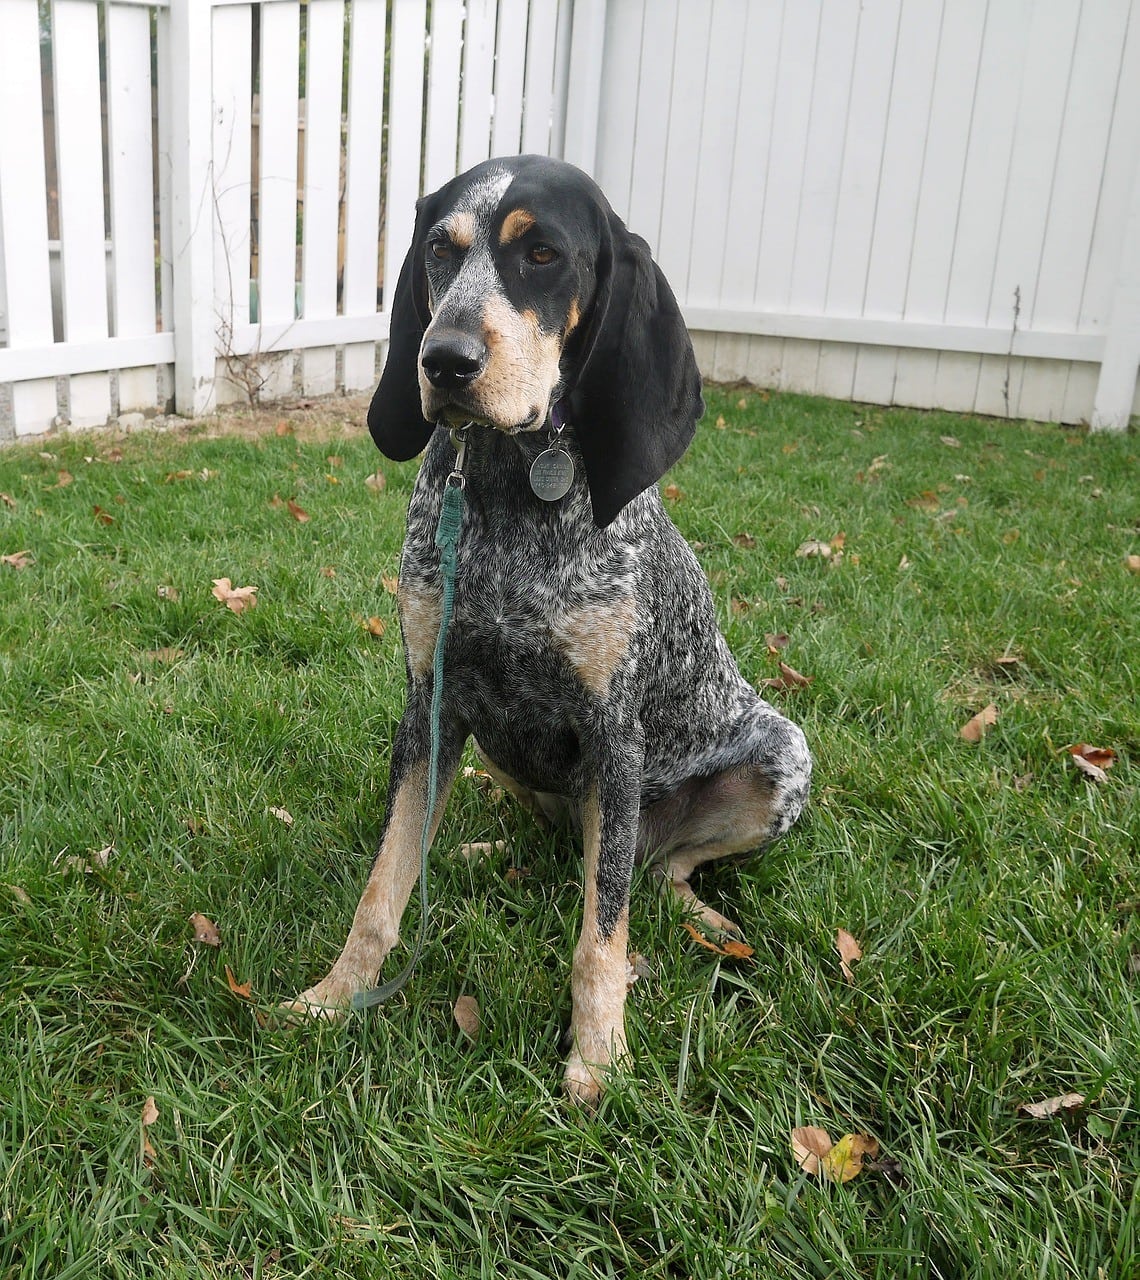 are bluetick coonhounds good pets